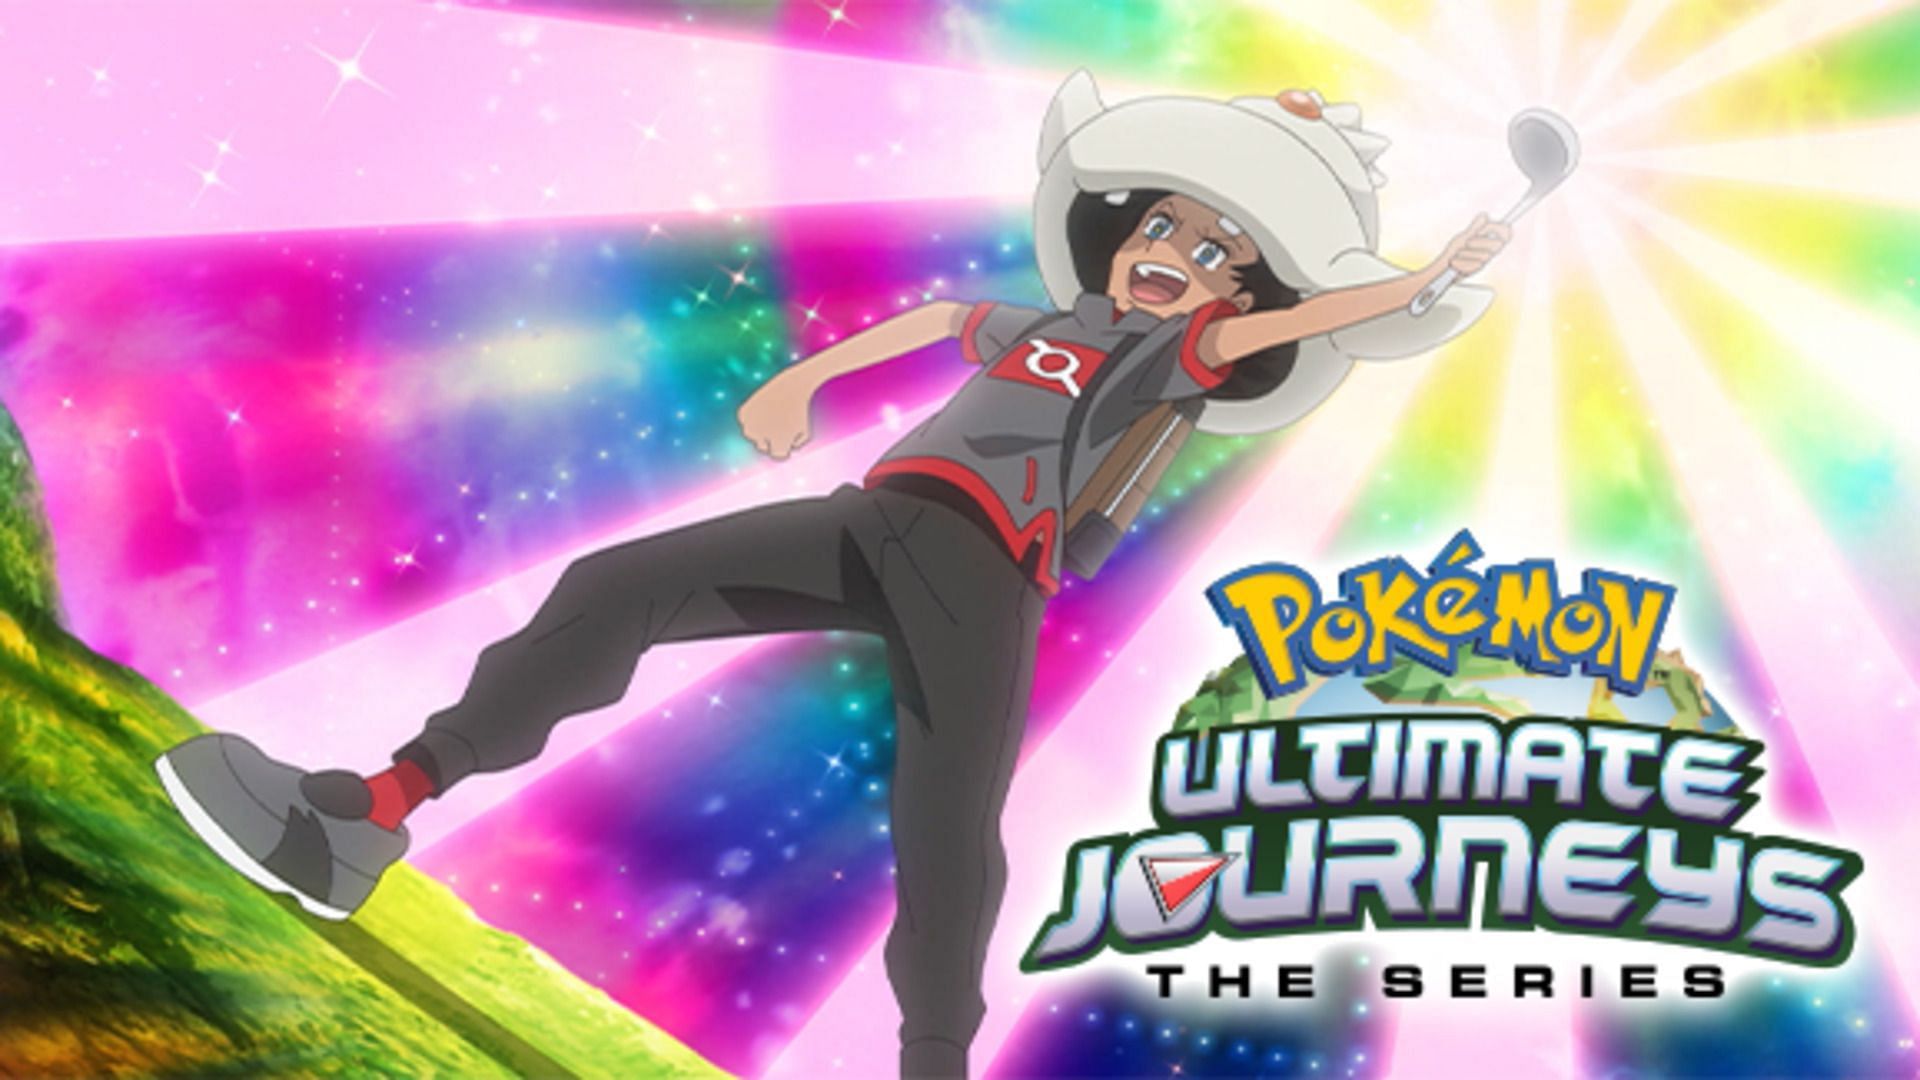 Pokémon Ultimate Journeys' Part 1 Coming to Netflix in 2022